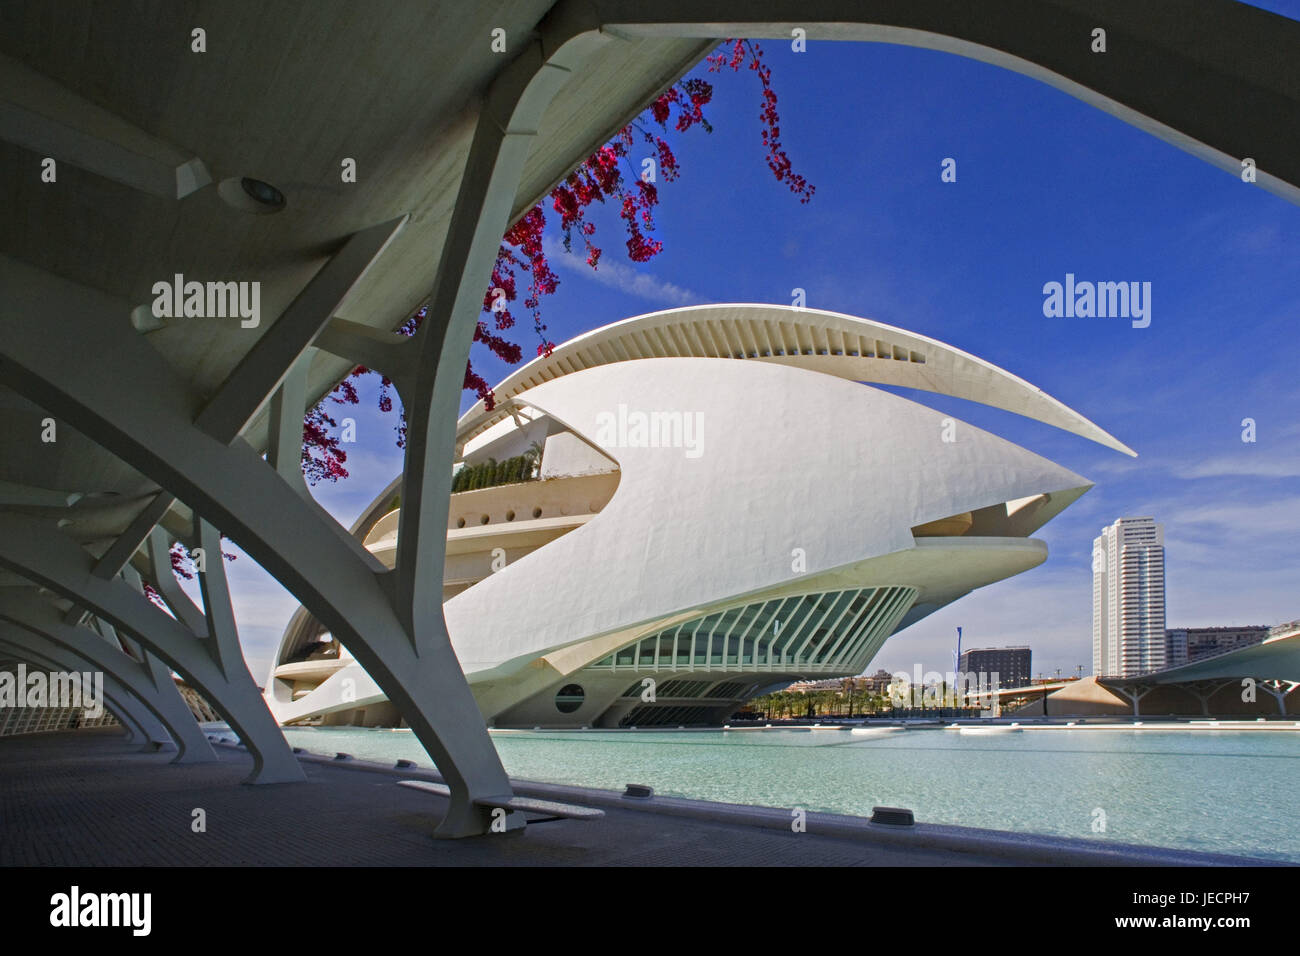 Spain, Valencia, Ciudad de read Artes Y read Ciencias', Palau de les Arts Reina Sofia, opera, basin, cultural park, subject park, outside areas, uncovered areas, structures, buildings, architecture, avant-garde, modern, music palace, opera, opera-house, construction, place of interest, destination, tourism, play of water, well, water cymbal, background, high rises, Stock Photo